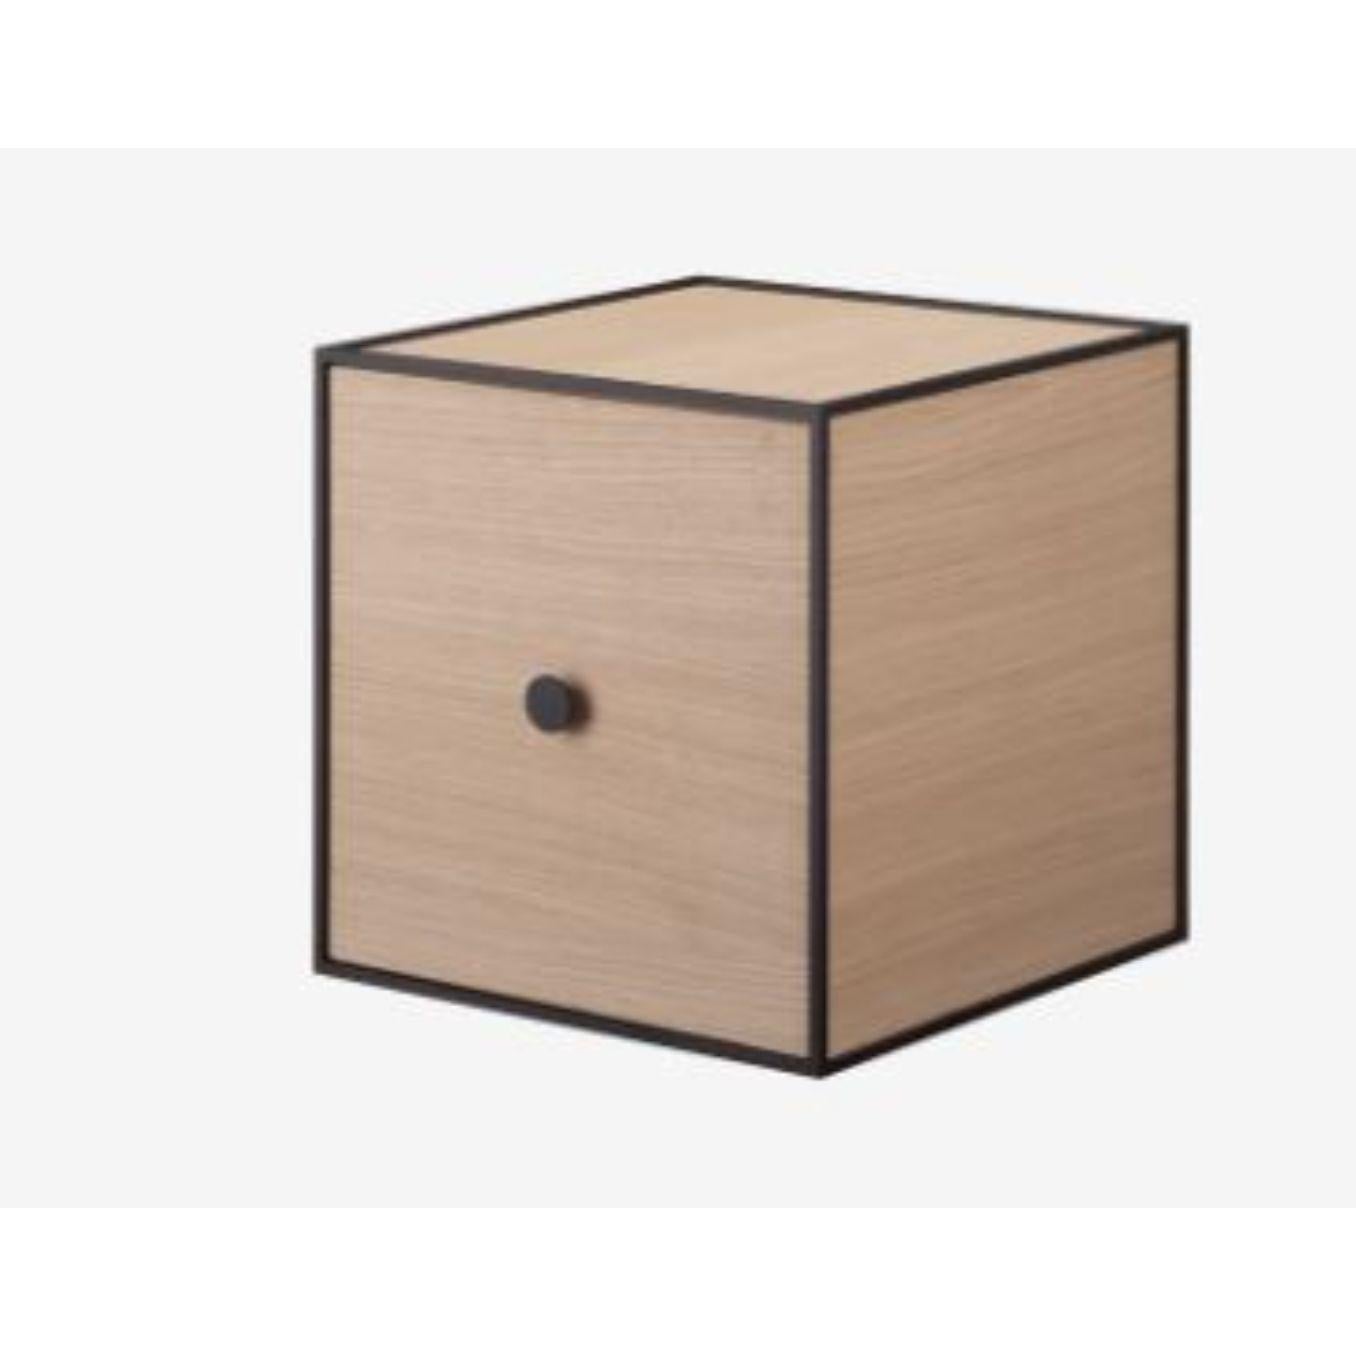 35 oak frame box with door by Lassen.
Dimensions: W 35 x D 35 x H 35 cm 
Materials: Finér, melamin, melamin, melamine, metal, veneer, oak.
Also available in different colors and dimensions. 

By Lassen is a Danish design brand focused on iconic